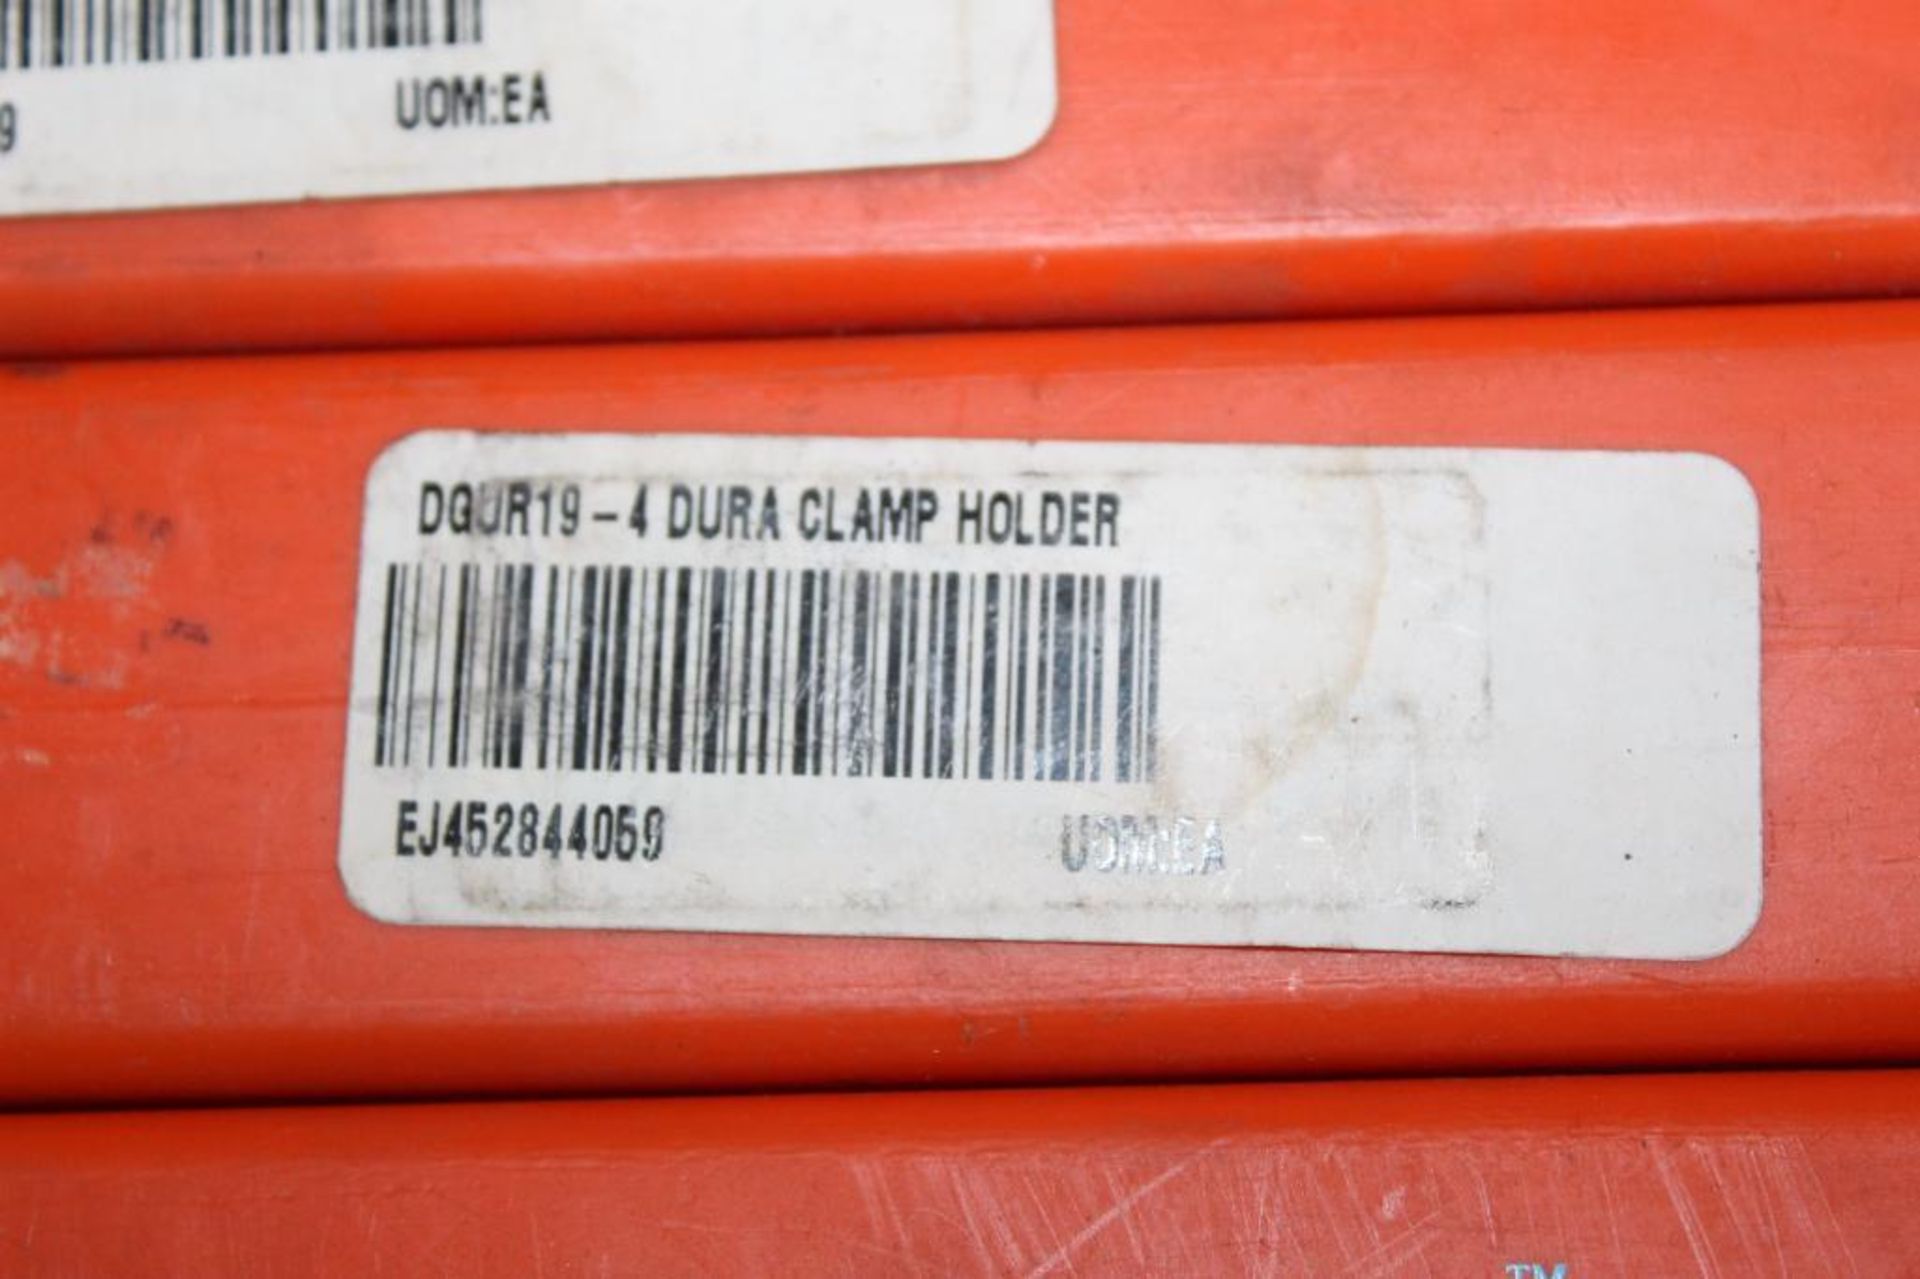 Lot of (4) Duracarb DGUR19-4 Dura Clamp Holder EJ452844059 - Image 4 of 4